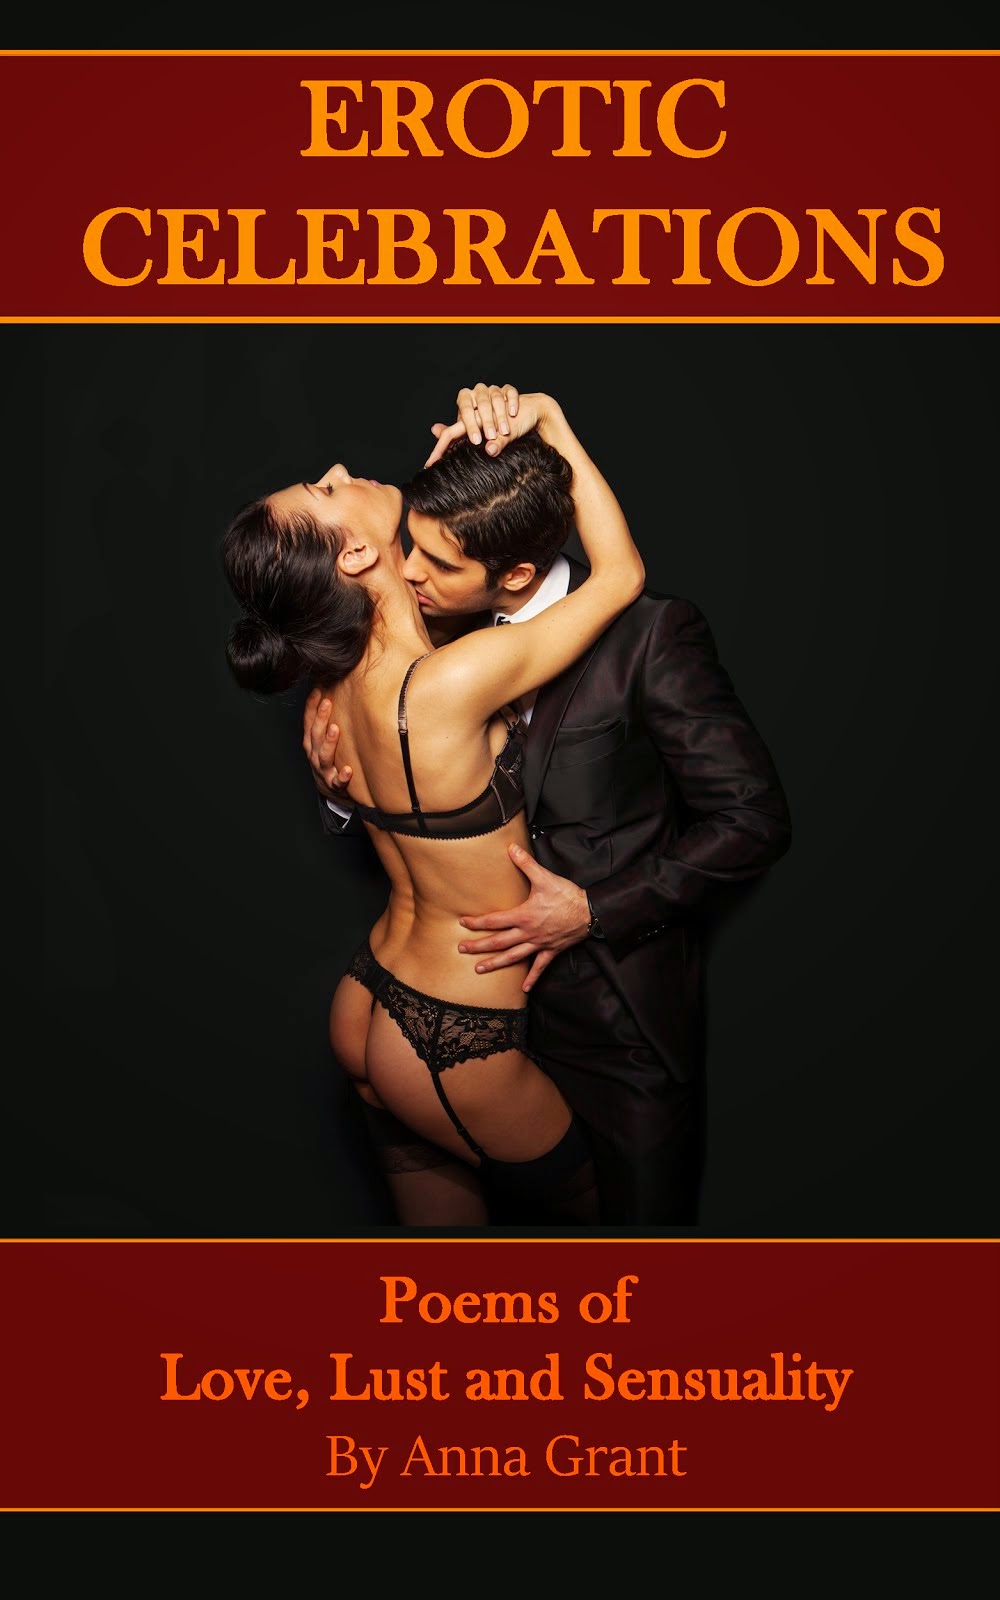 Erotic Celebrations: Poems of Love, Lust and Sensuality